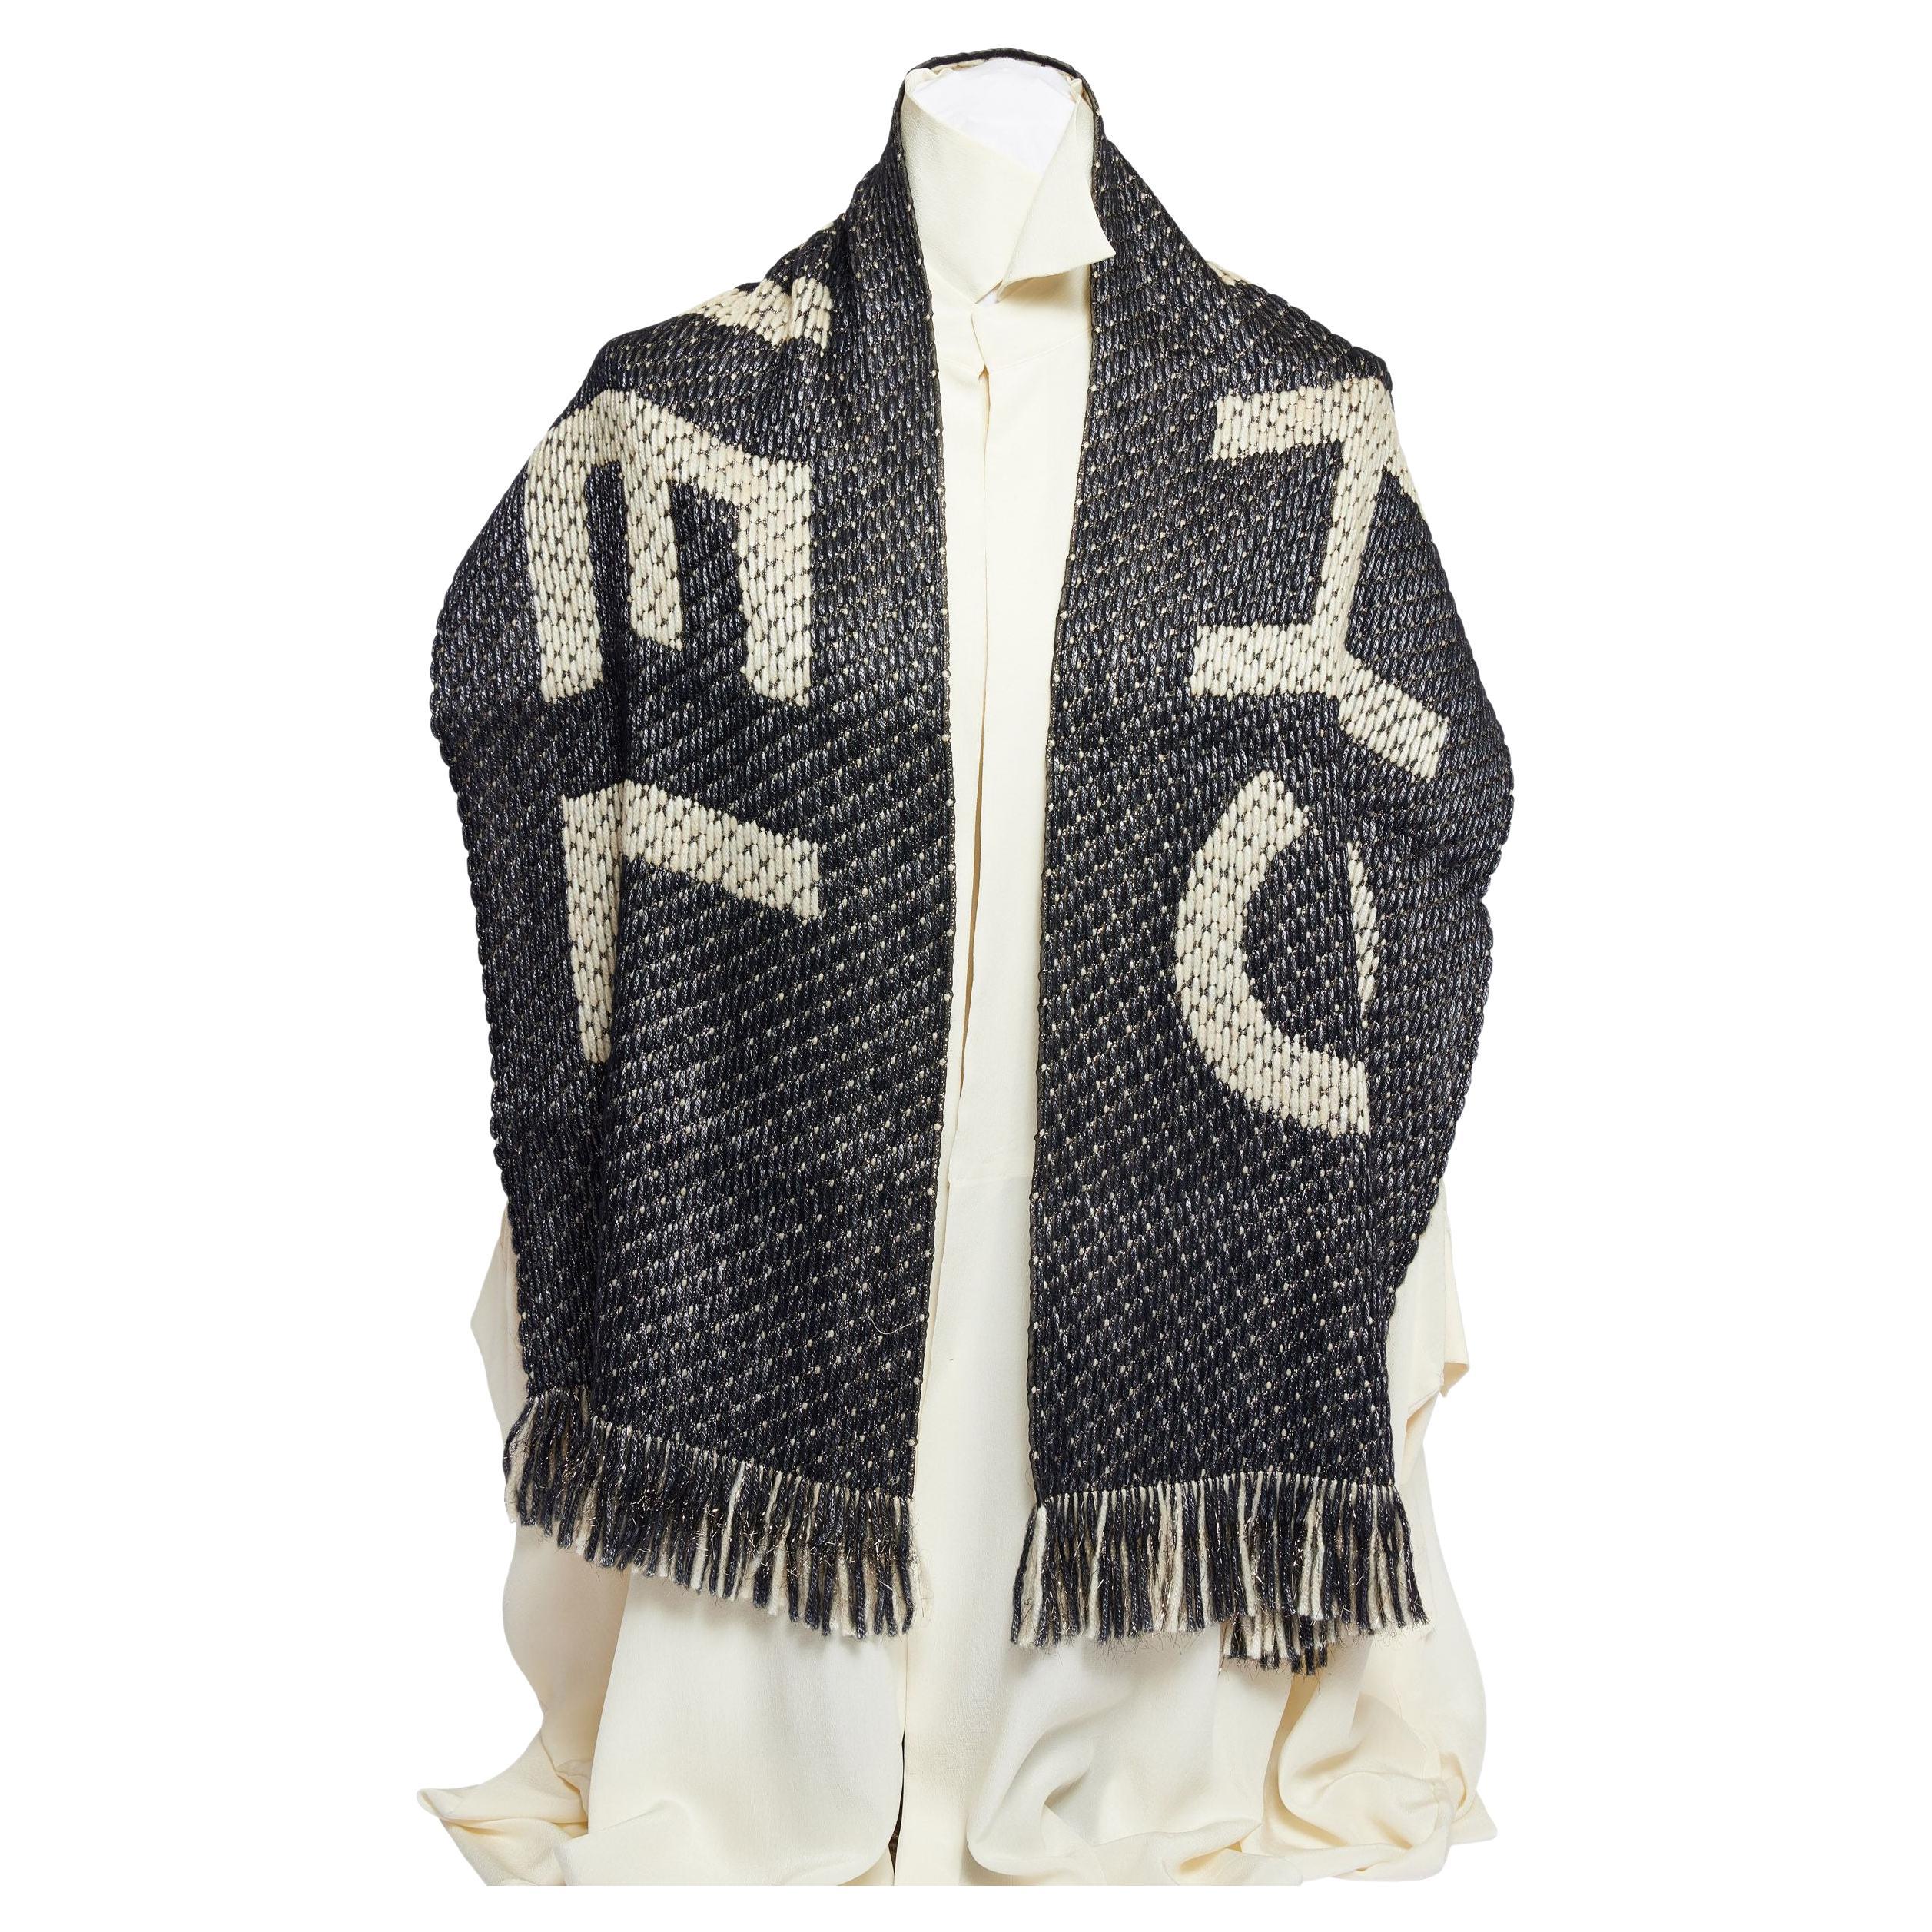 Chanel Black and White Metallic Scarf BN For Sale